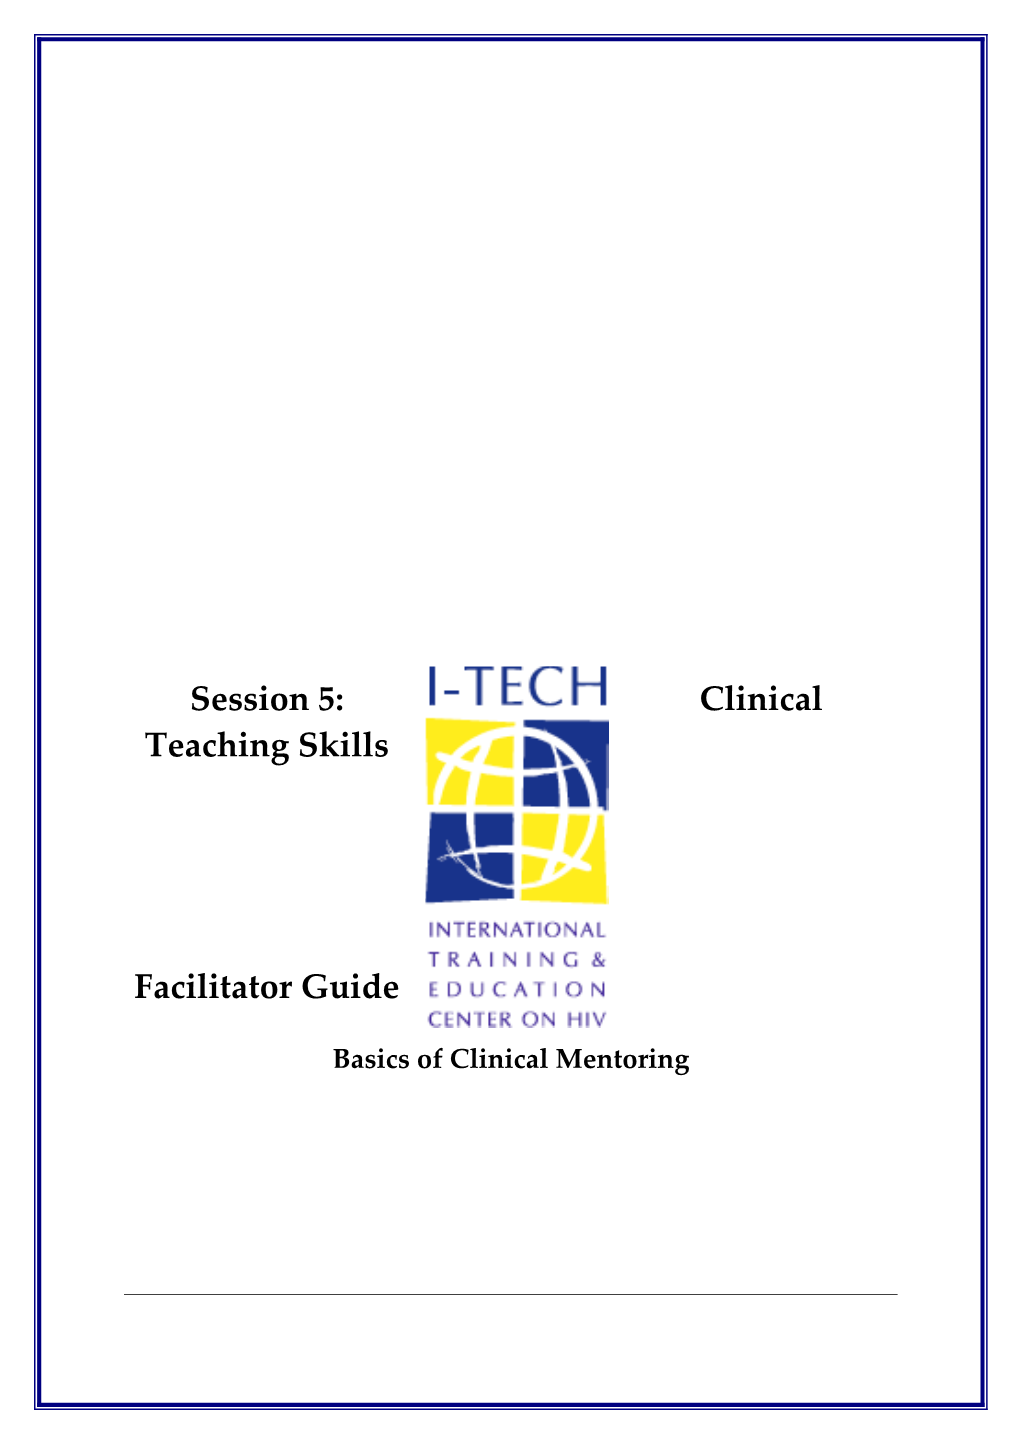 Session 5: Clinical Teaching Skills